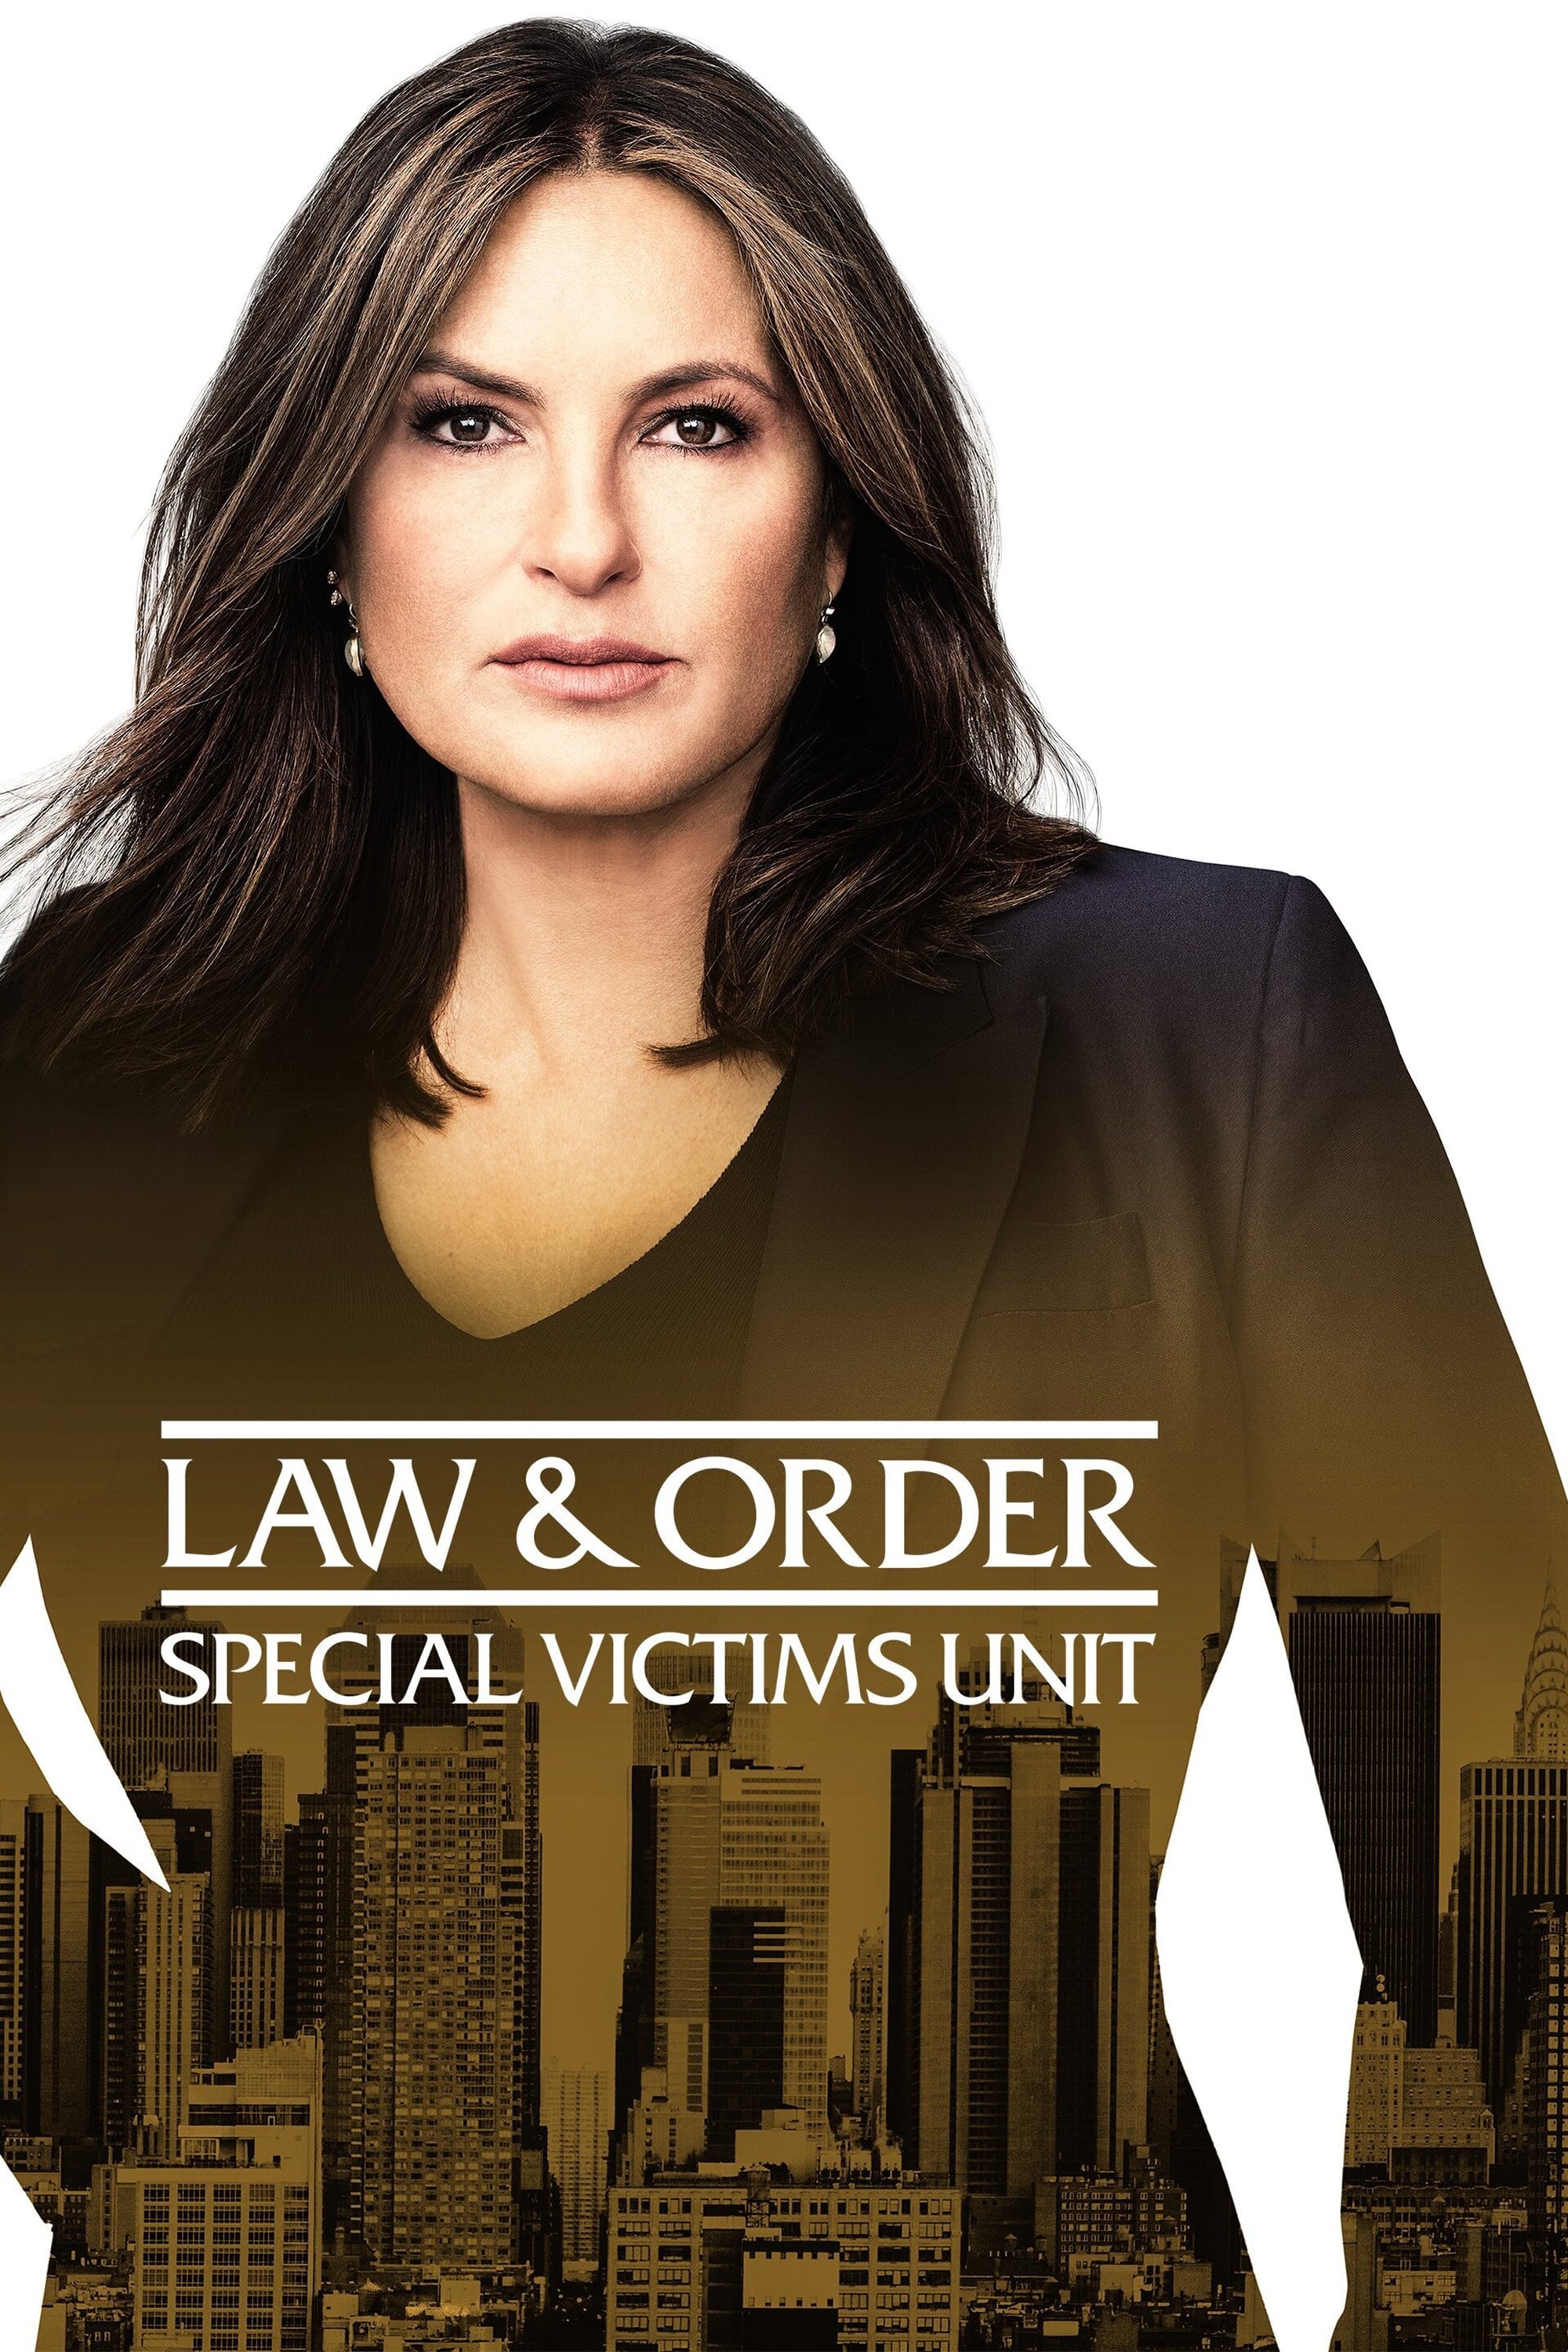 Law & Order: Special Victims Unit TV Shows About Domestic Abuse